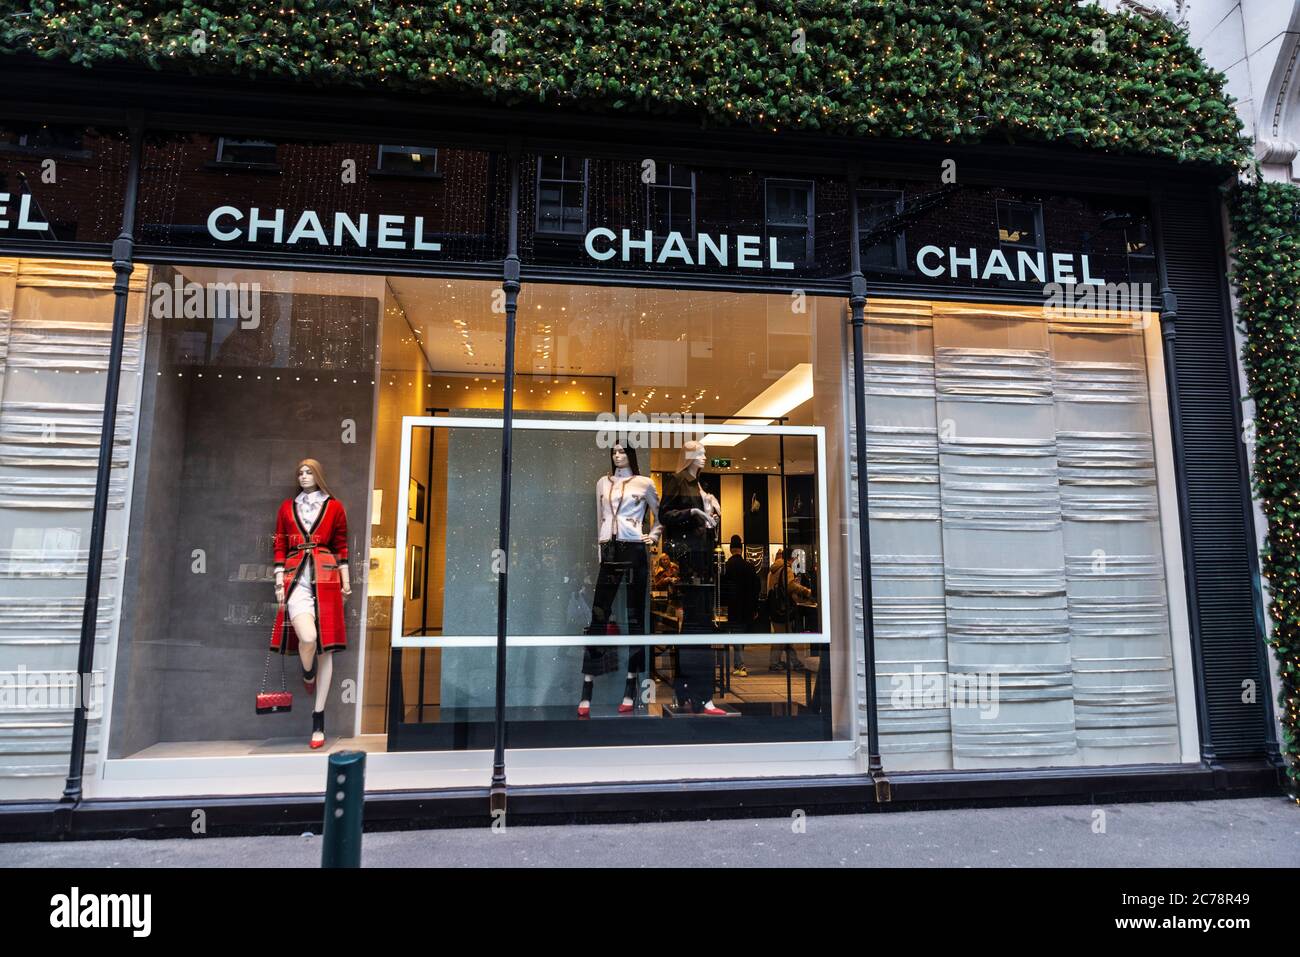 Dublin, Ireland - December 30, 2019: Facade of a Chanel clothing store with  people around in the center of Dublin, Ireland Stock Photo - Alamy